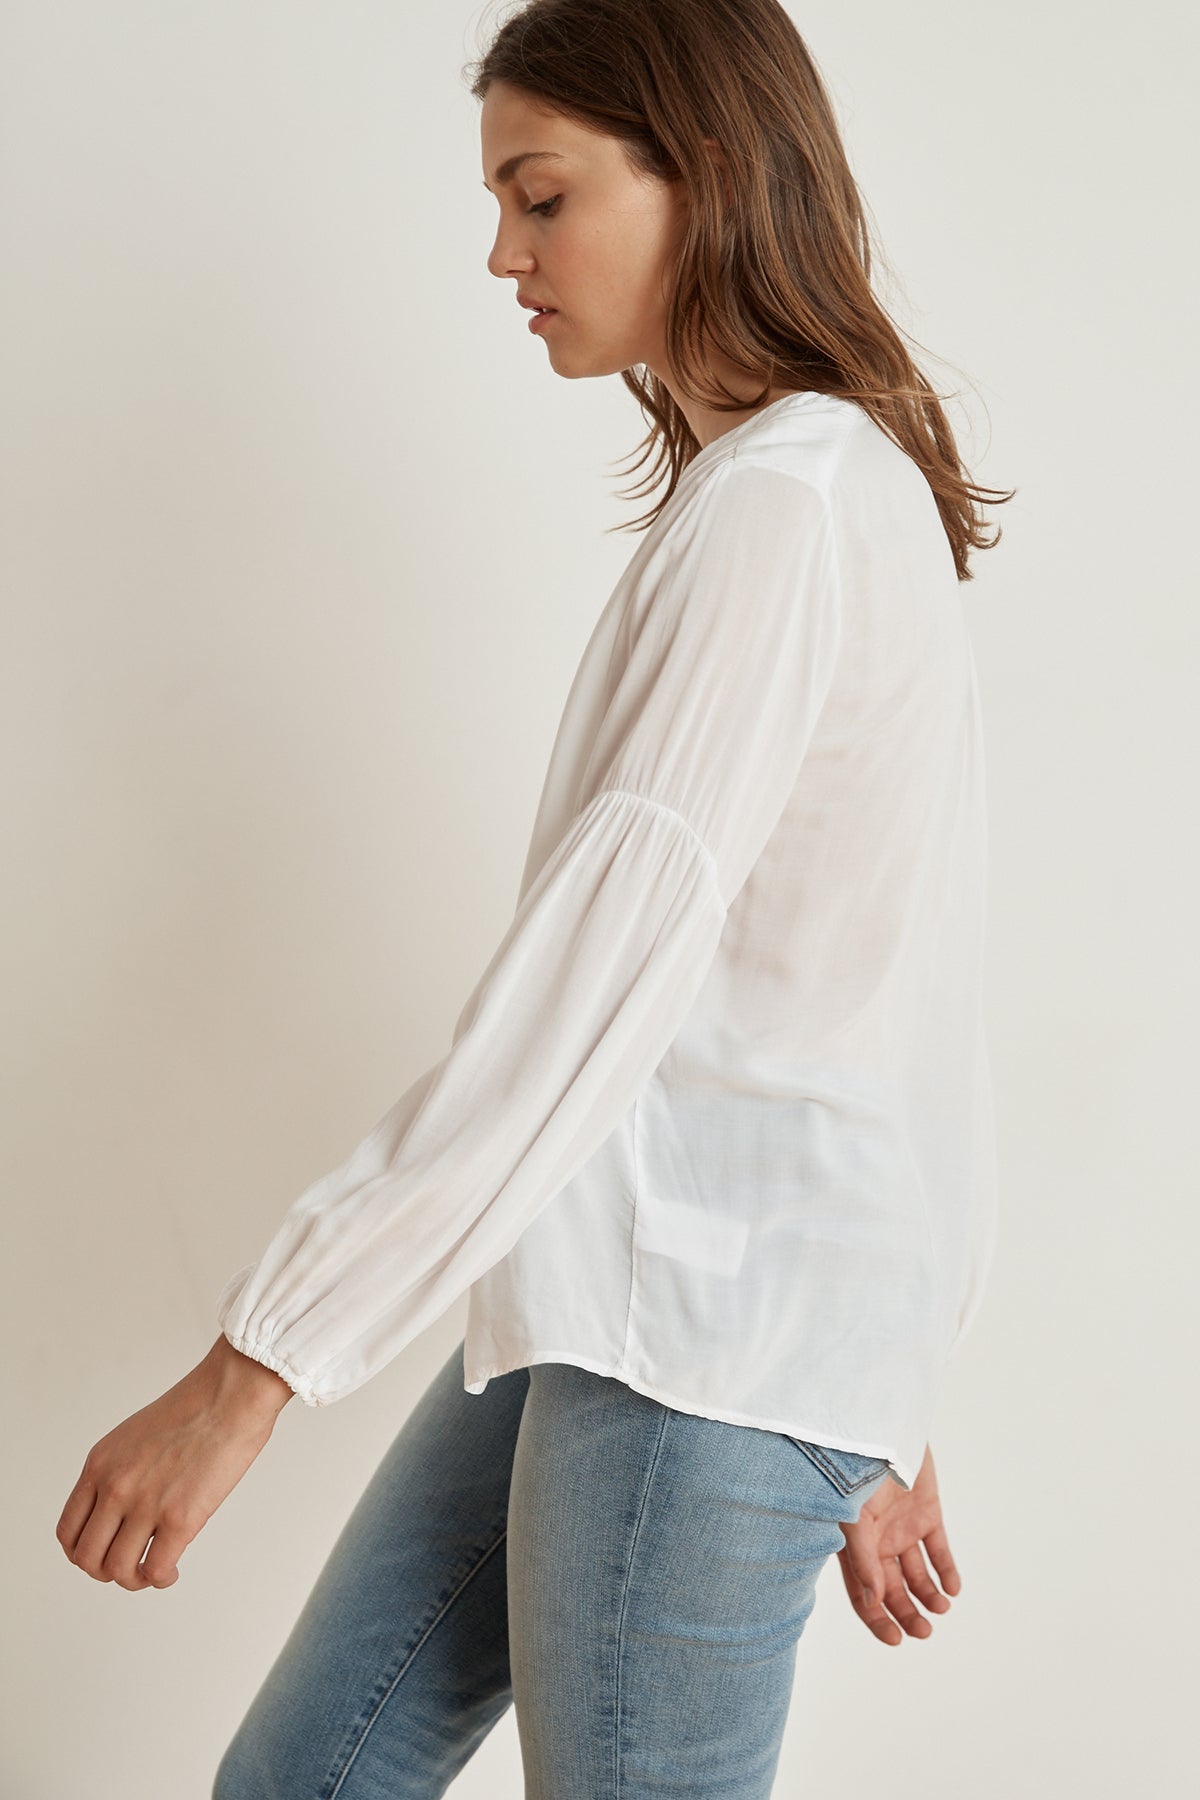 The model is wearing a YULIA RAYON CHALLIS PEASANT SLEEVE BLOUSE by Velvet by Graham & Spencer, which adds a breath of fresh air to her outfit.-1147602829393